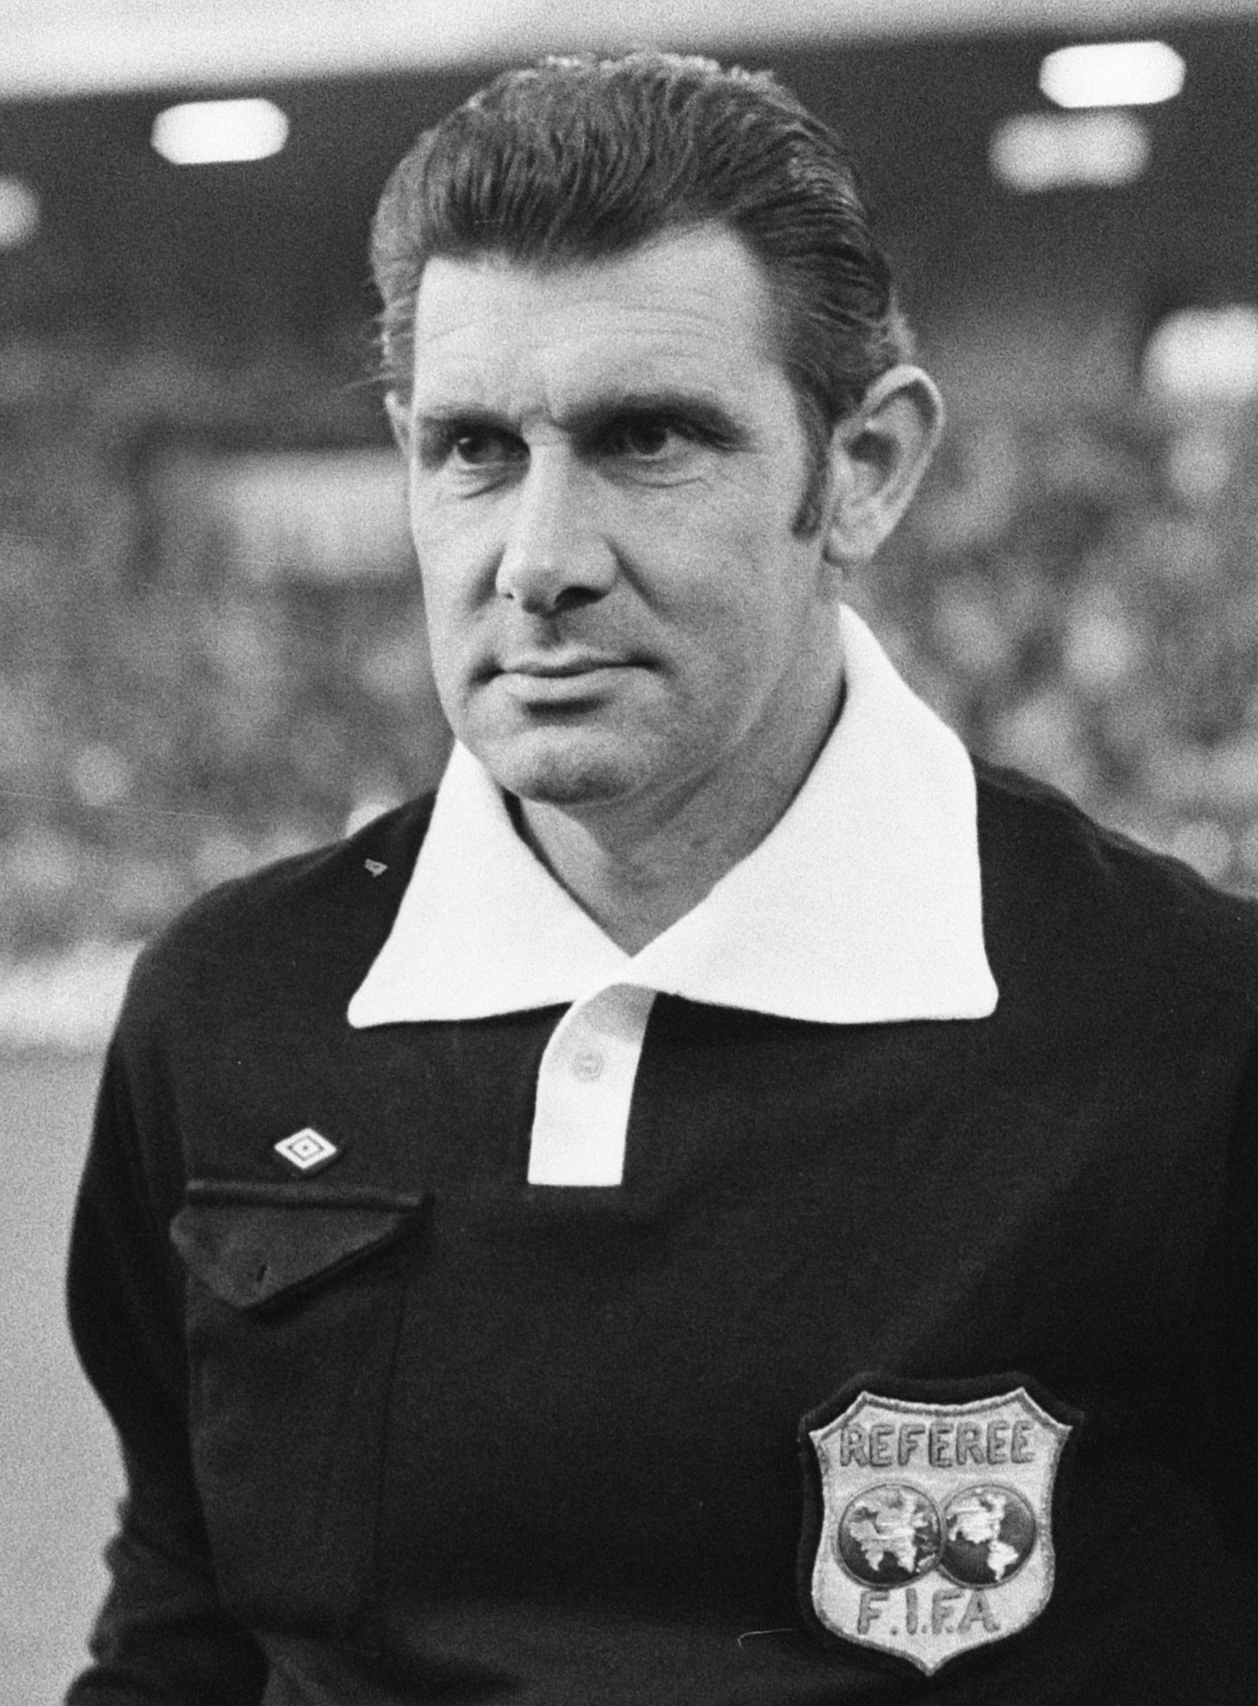 Jack Taylor is one of the best football referees of all time